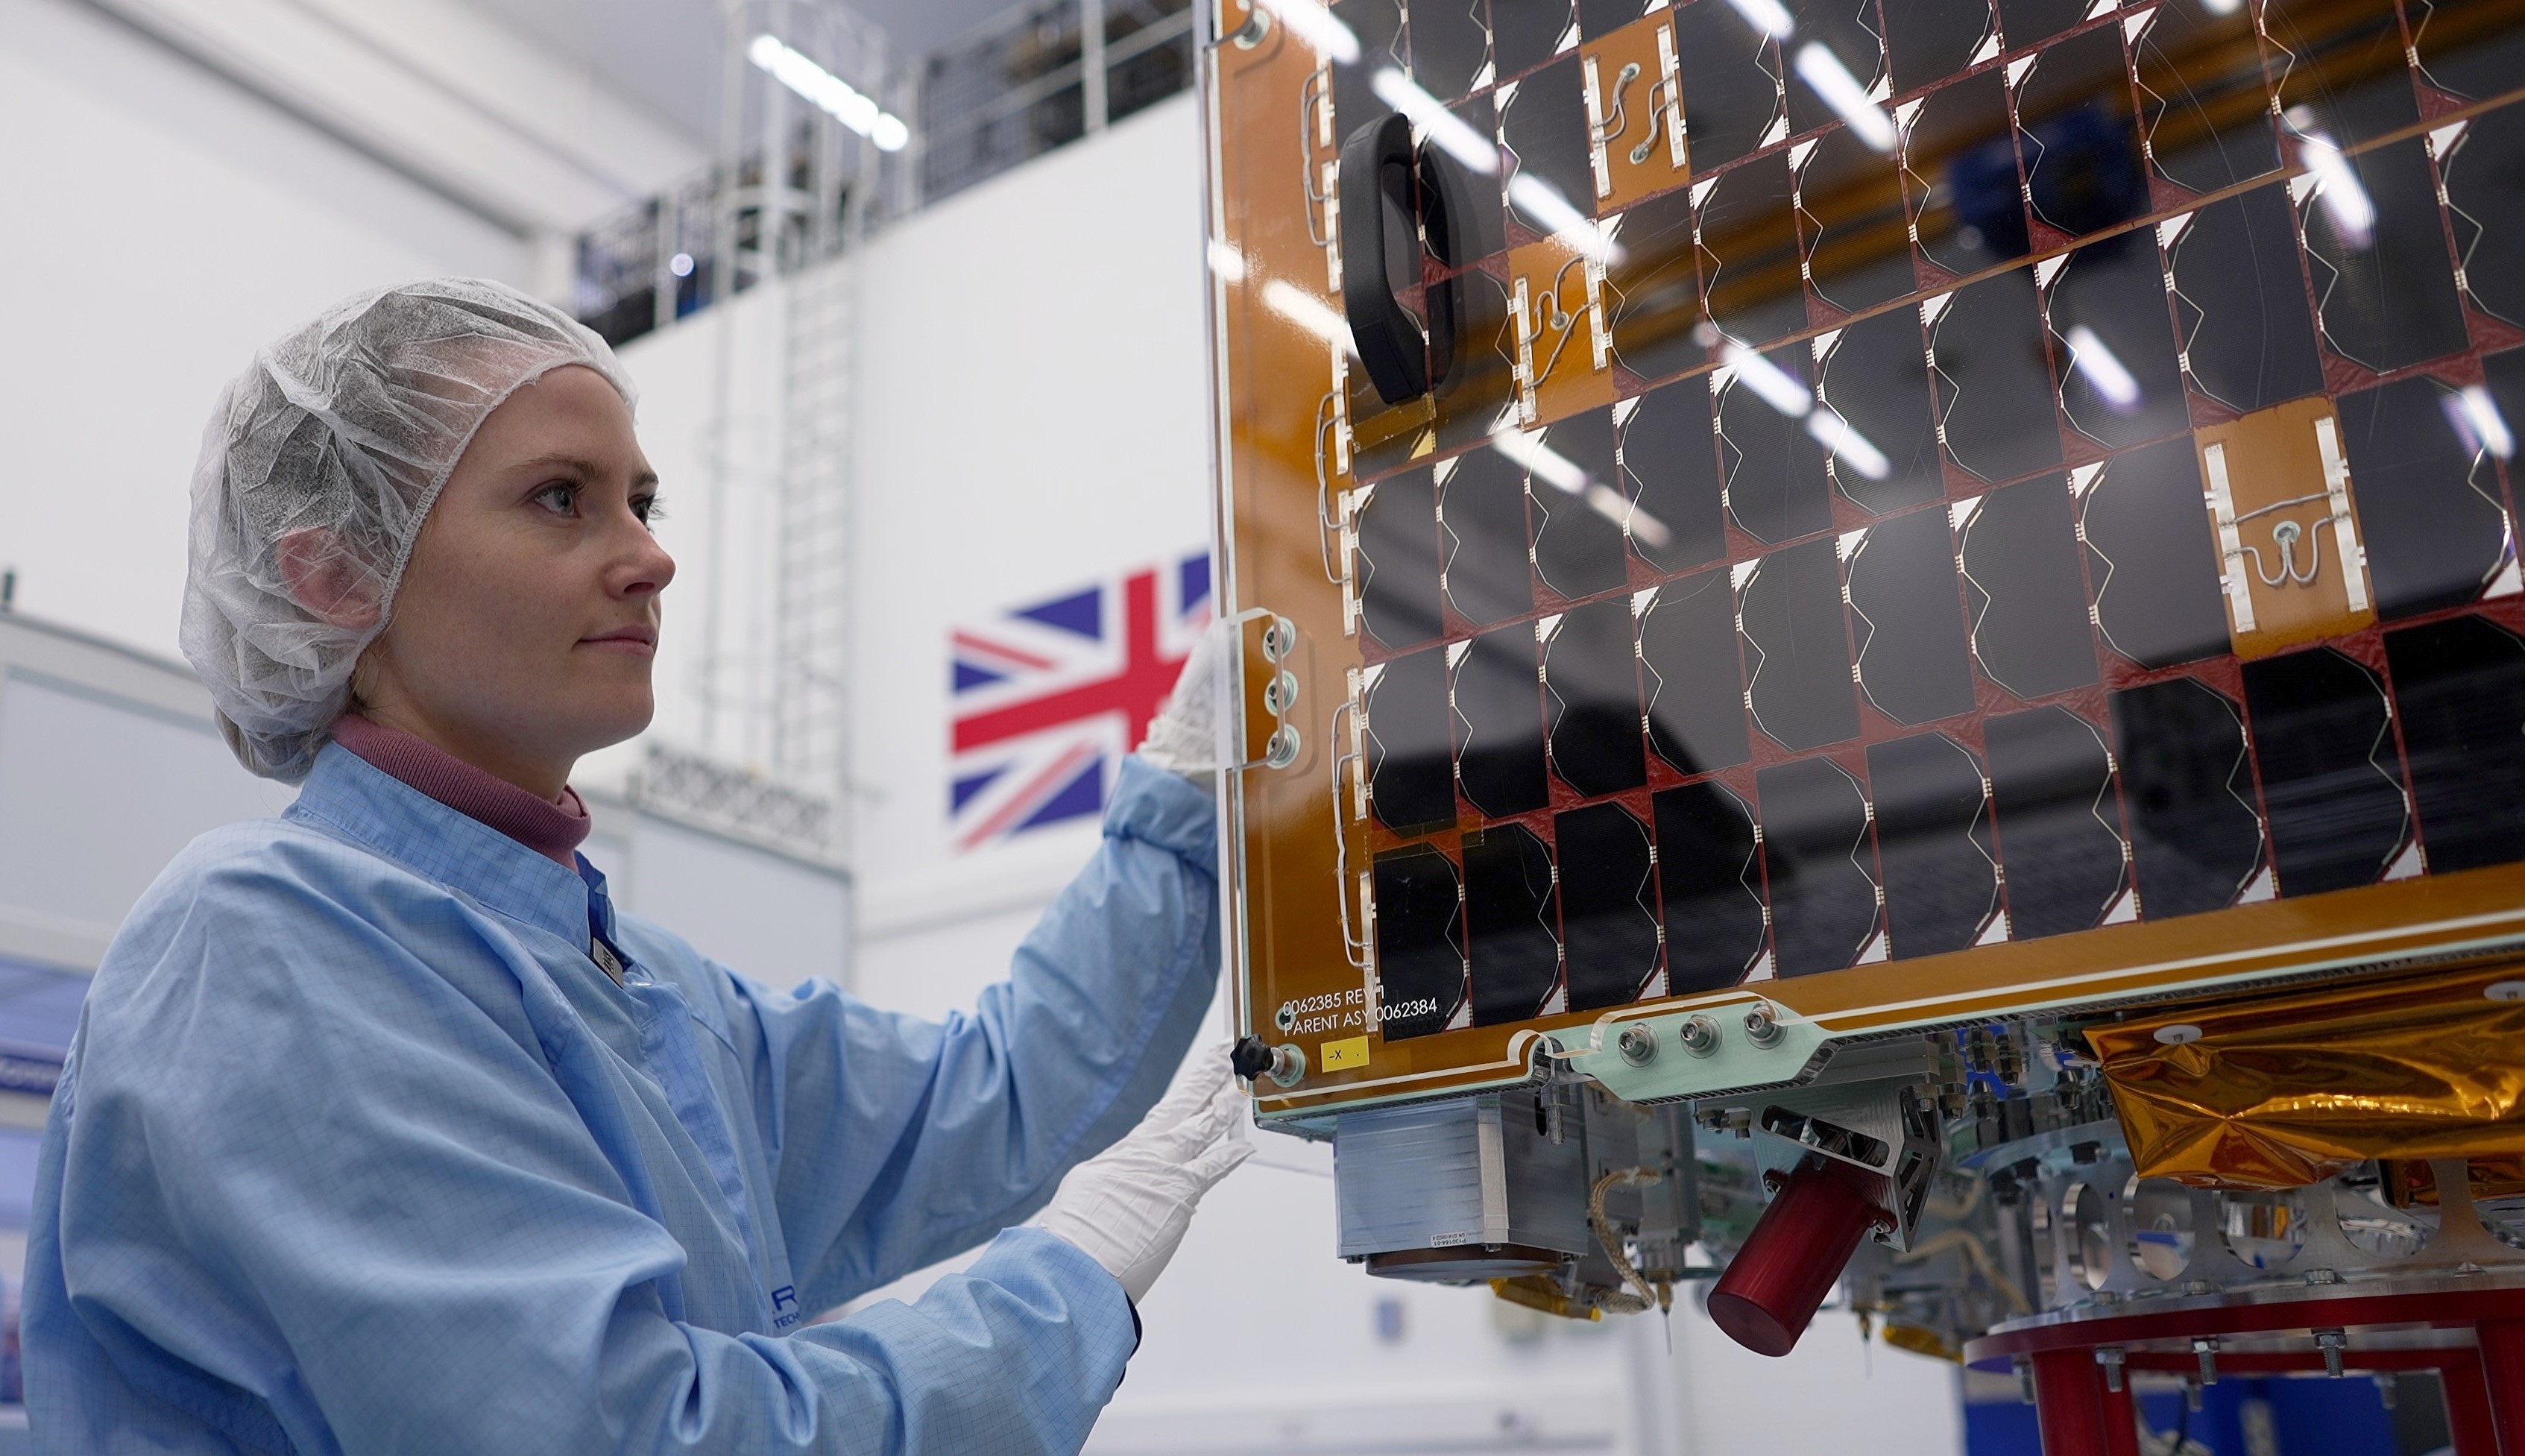 BUILDING WORLD-LEADING SMALL SATELLITES FOR 40+ YEARS